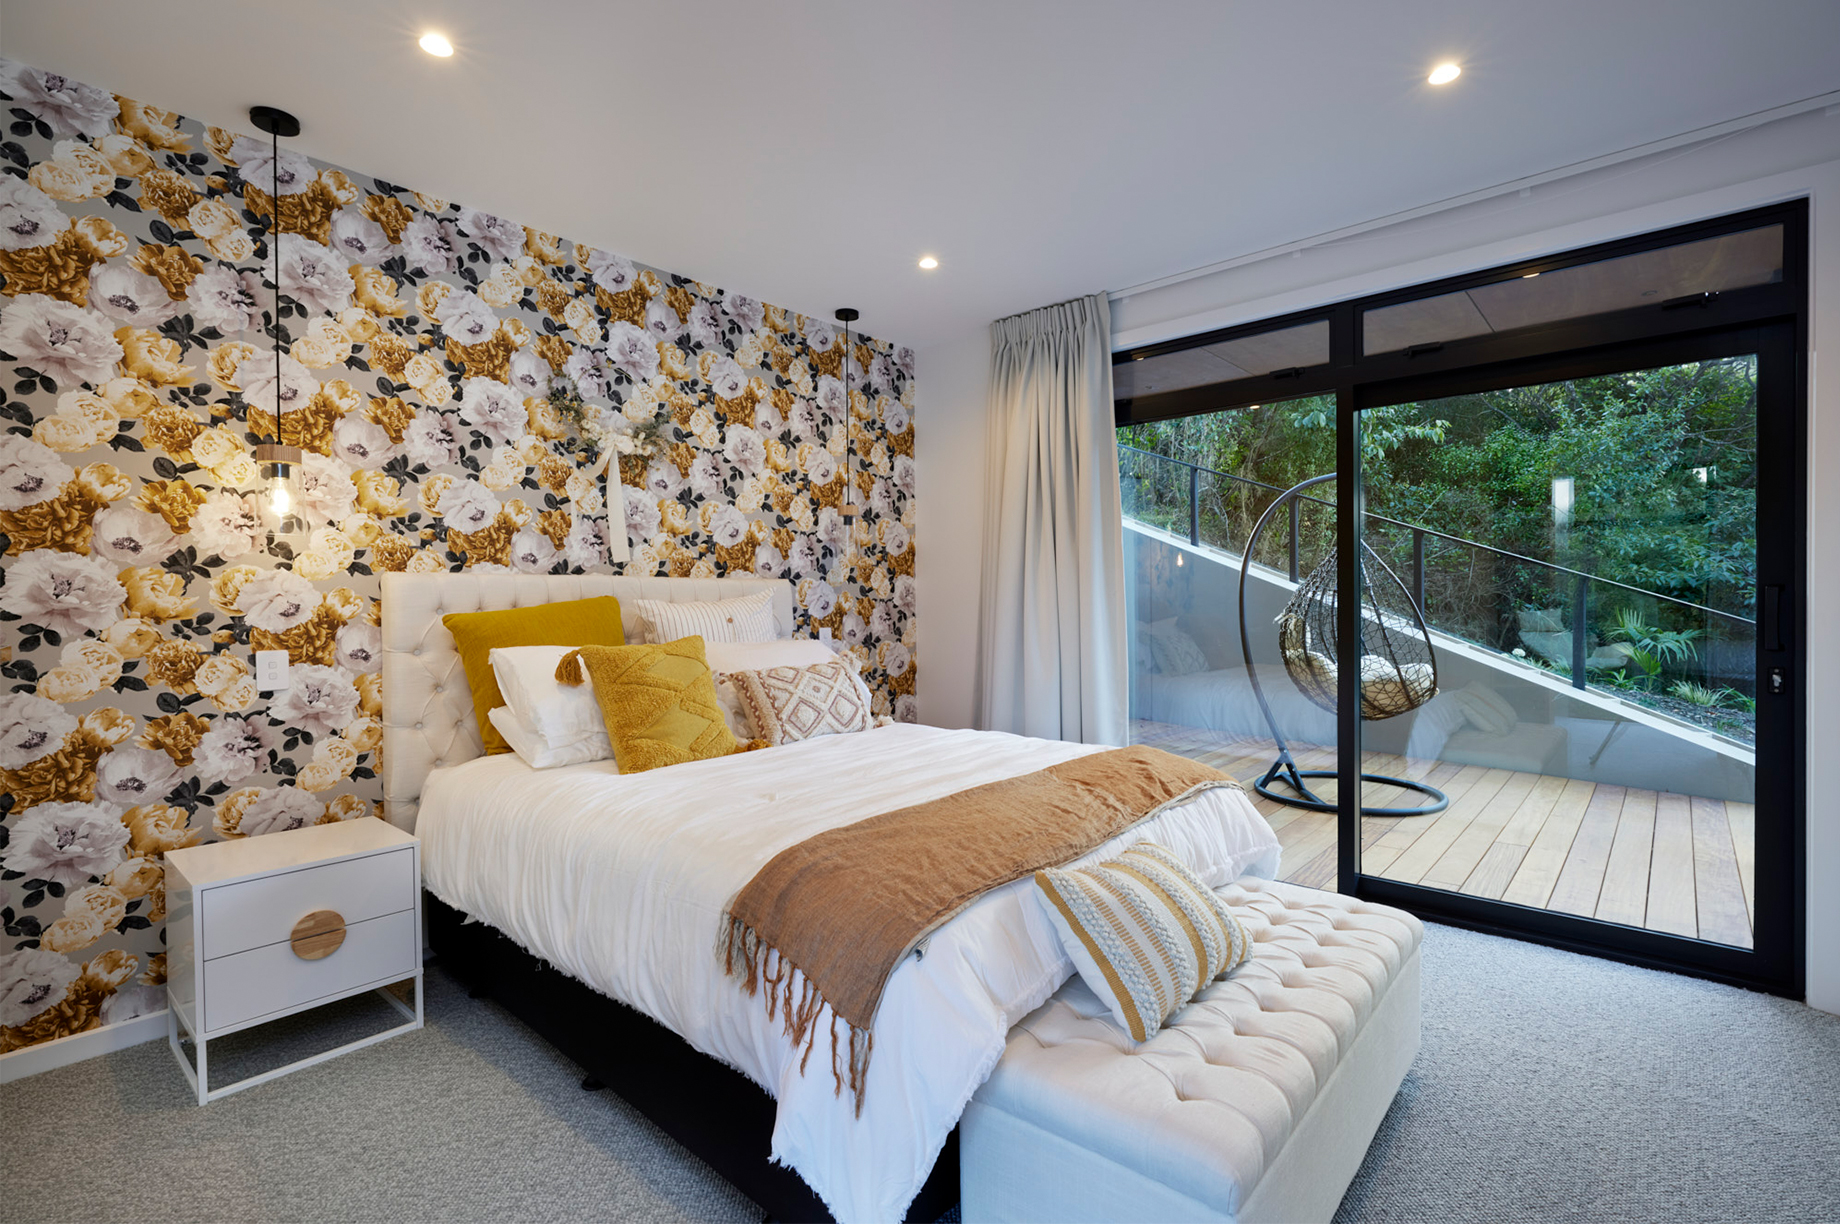 Wellington showhome bedroom with floral wallpaper interior